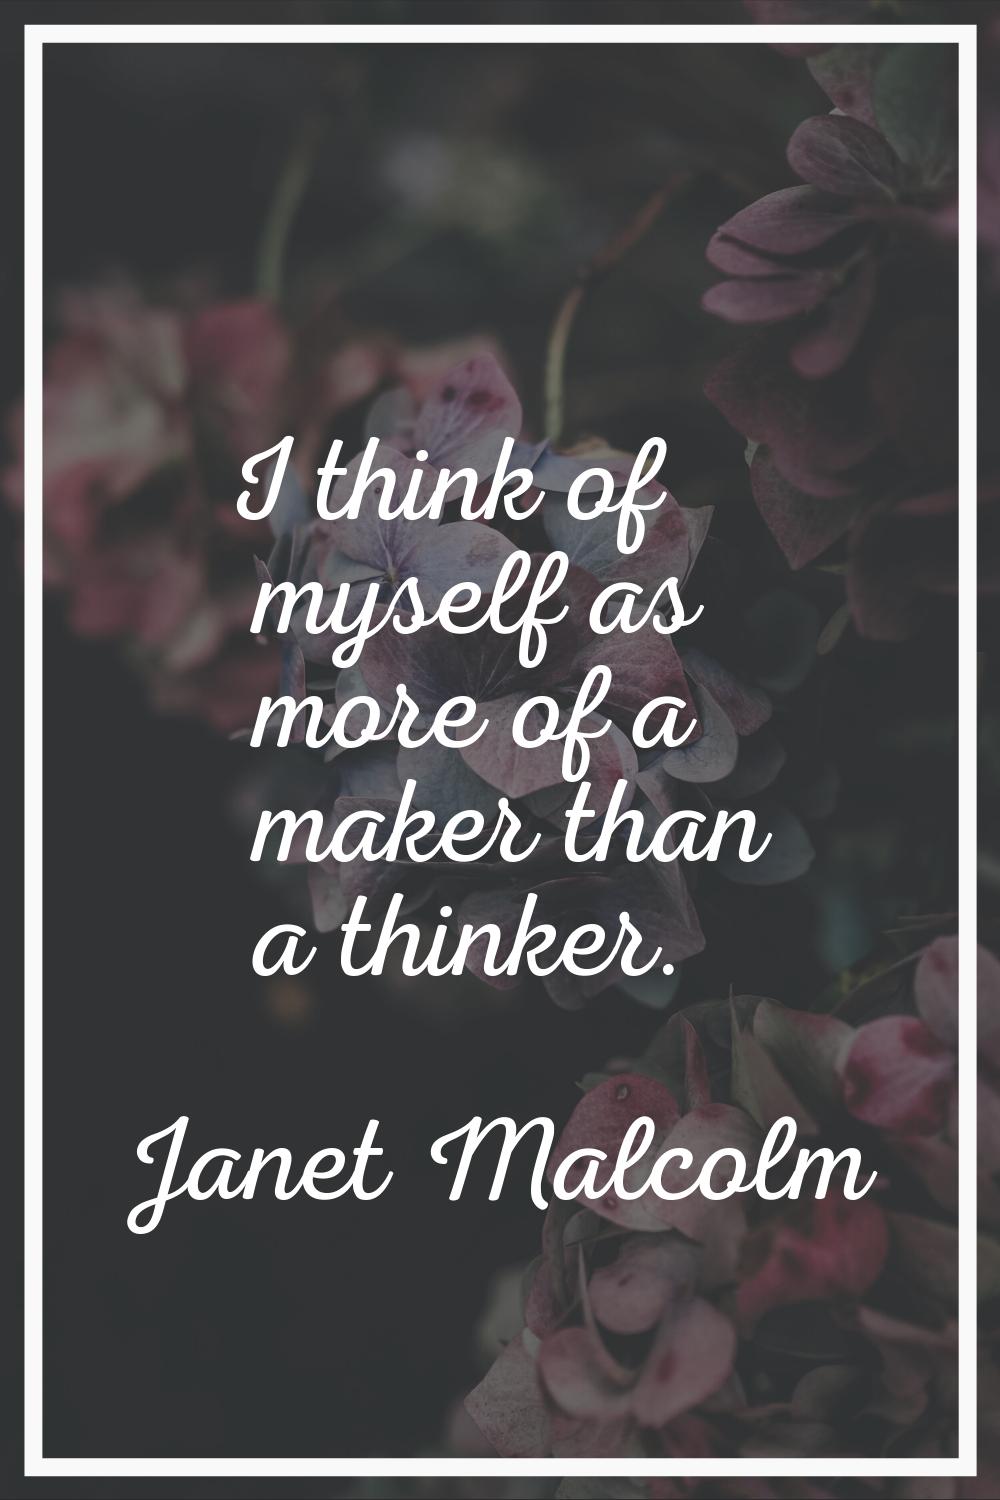 I think of myself as more of a maker than a thinker.